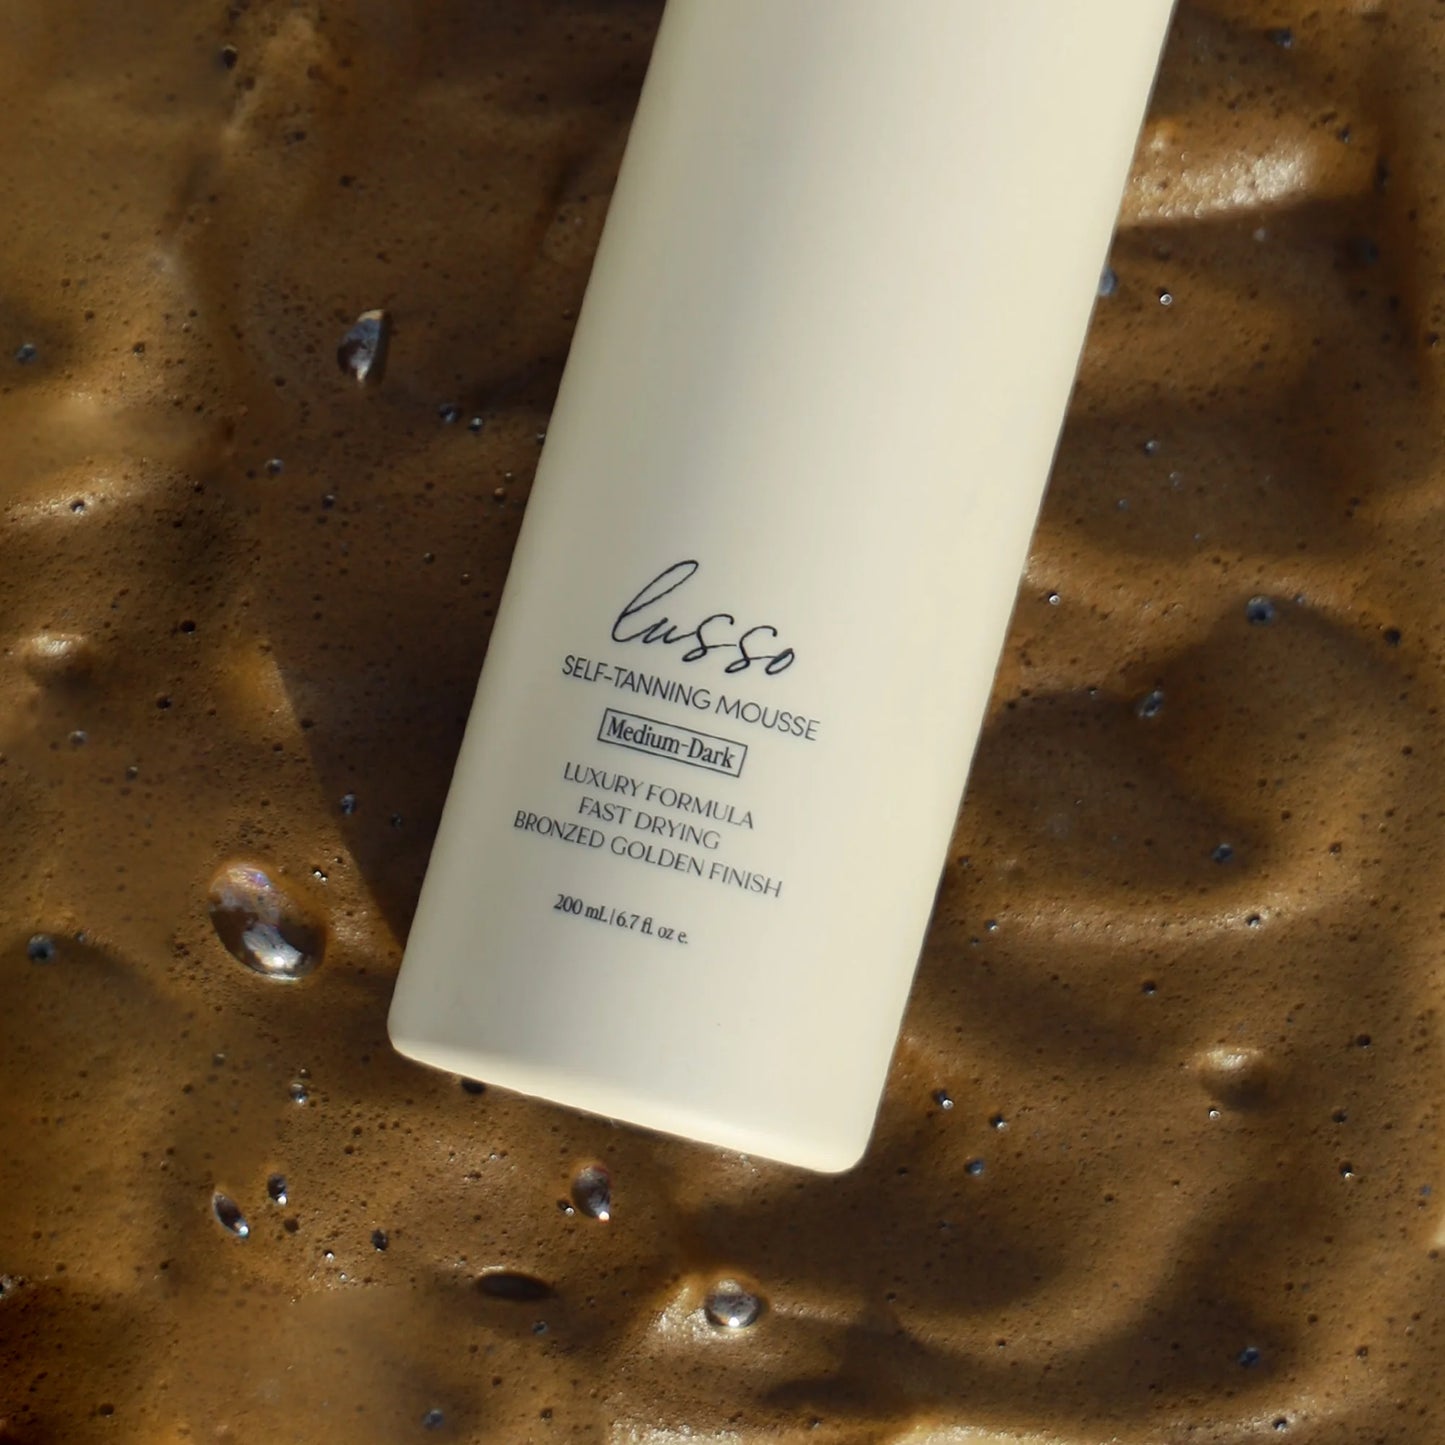 Lusso Self-Tanning Mousse